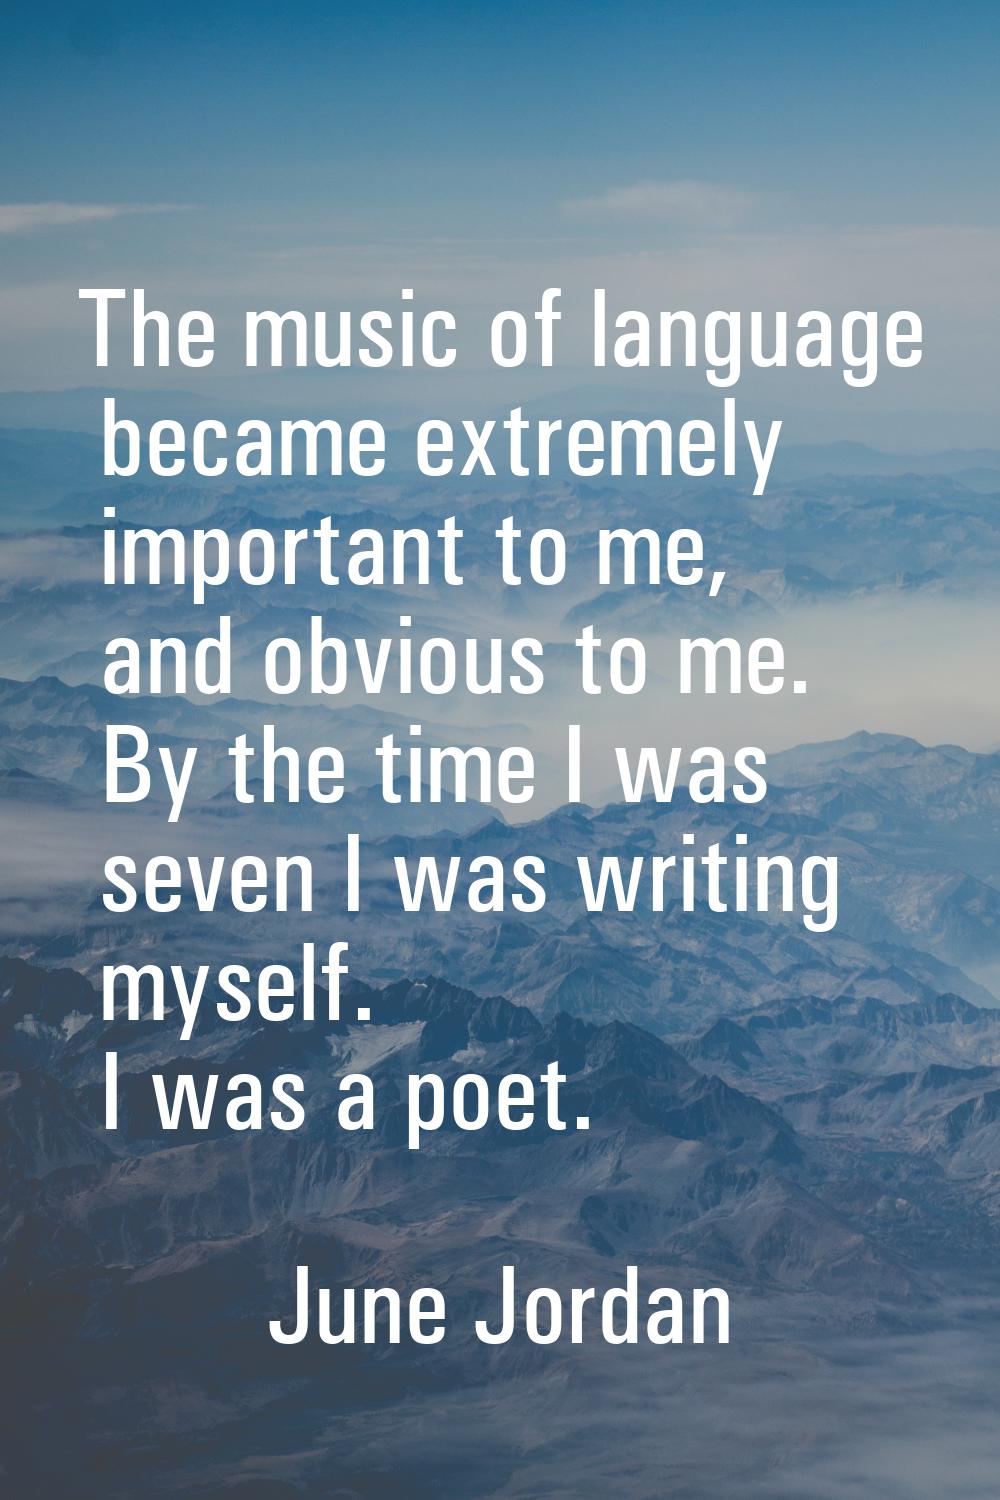 The music of language became extremely important to me, and obvious to me. By the time I was seven 